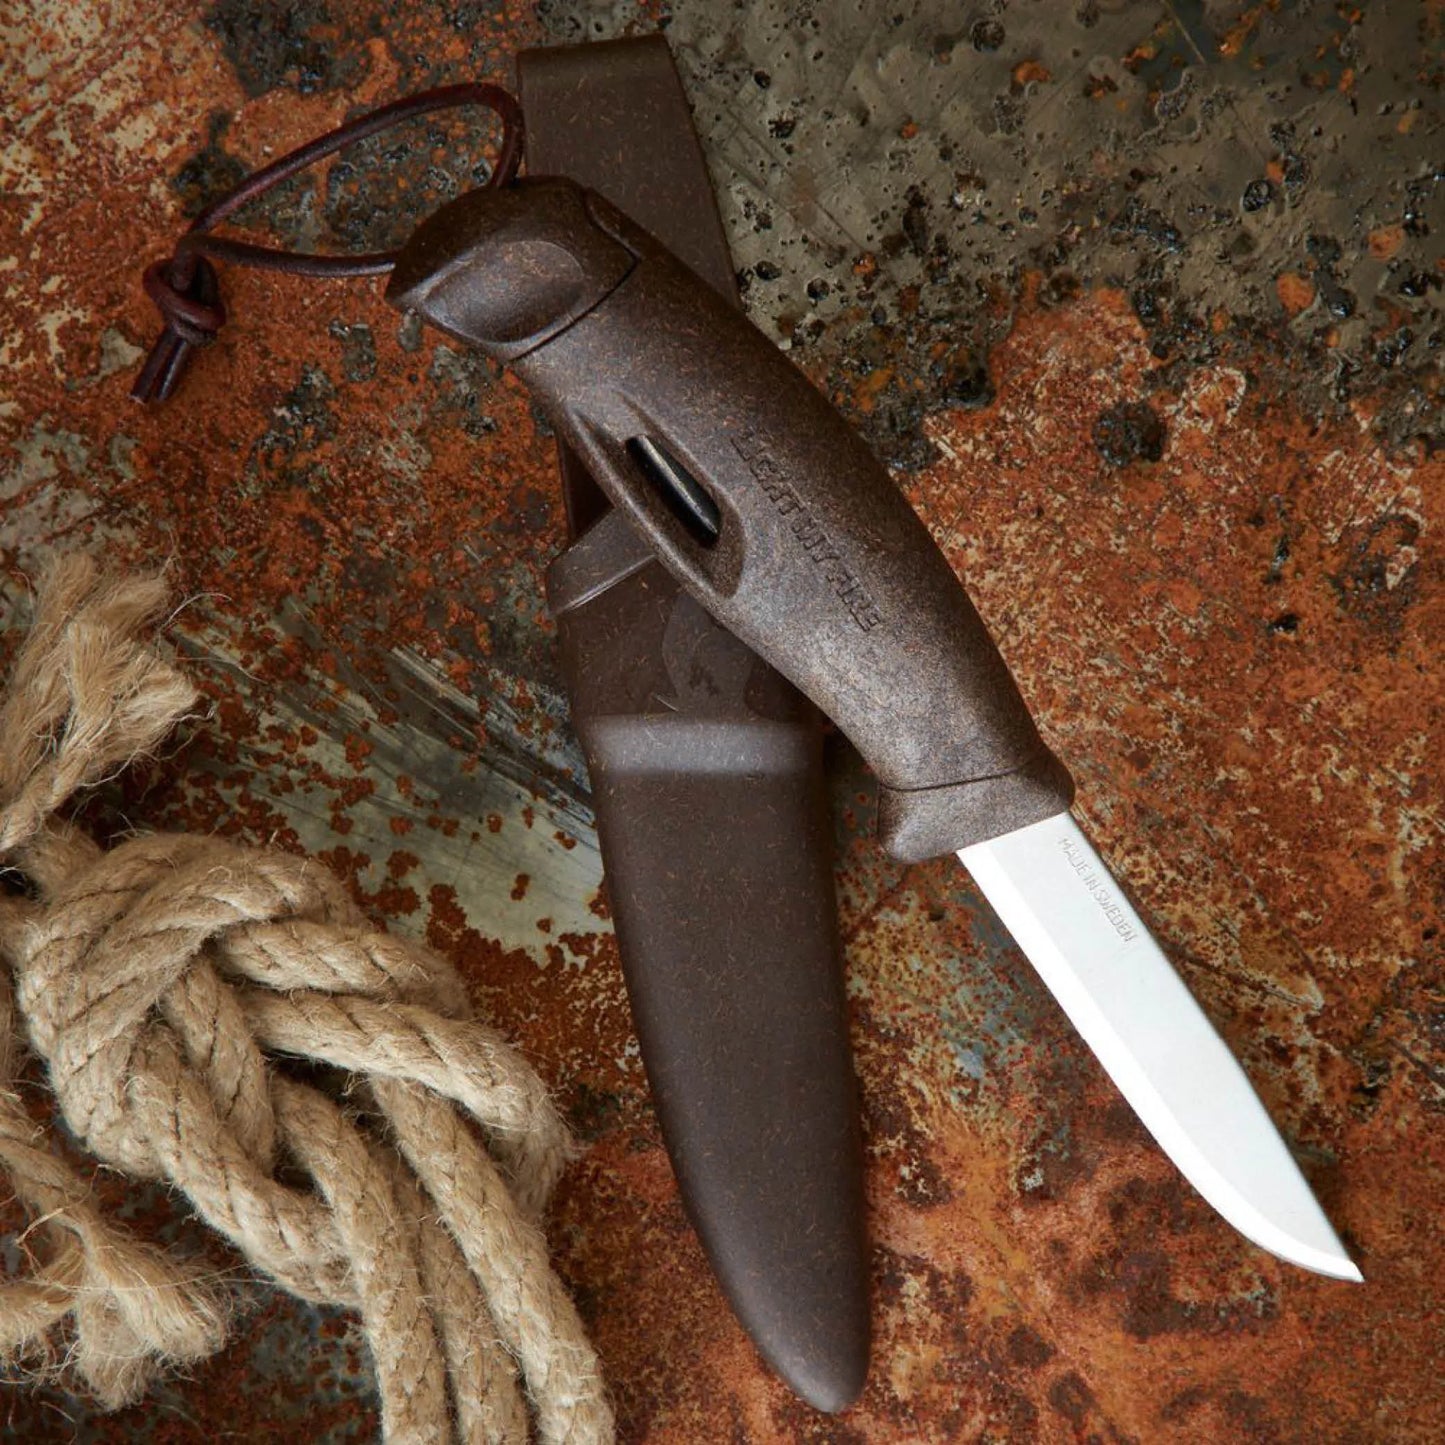 Brown knife and sheath next to rope on a rusty table.